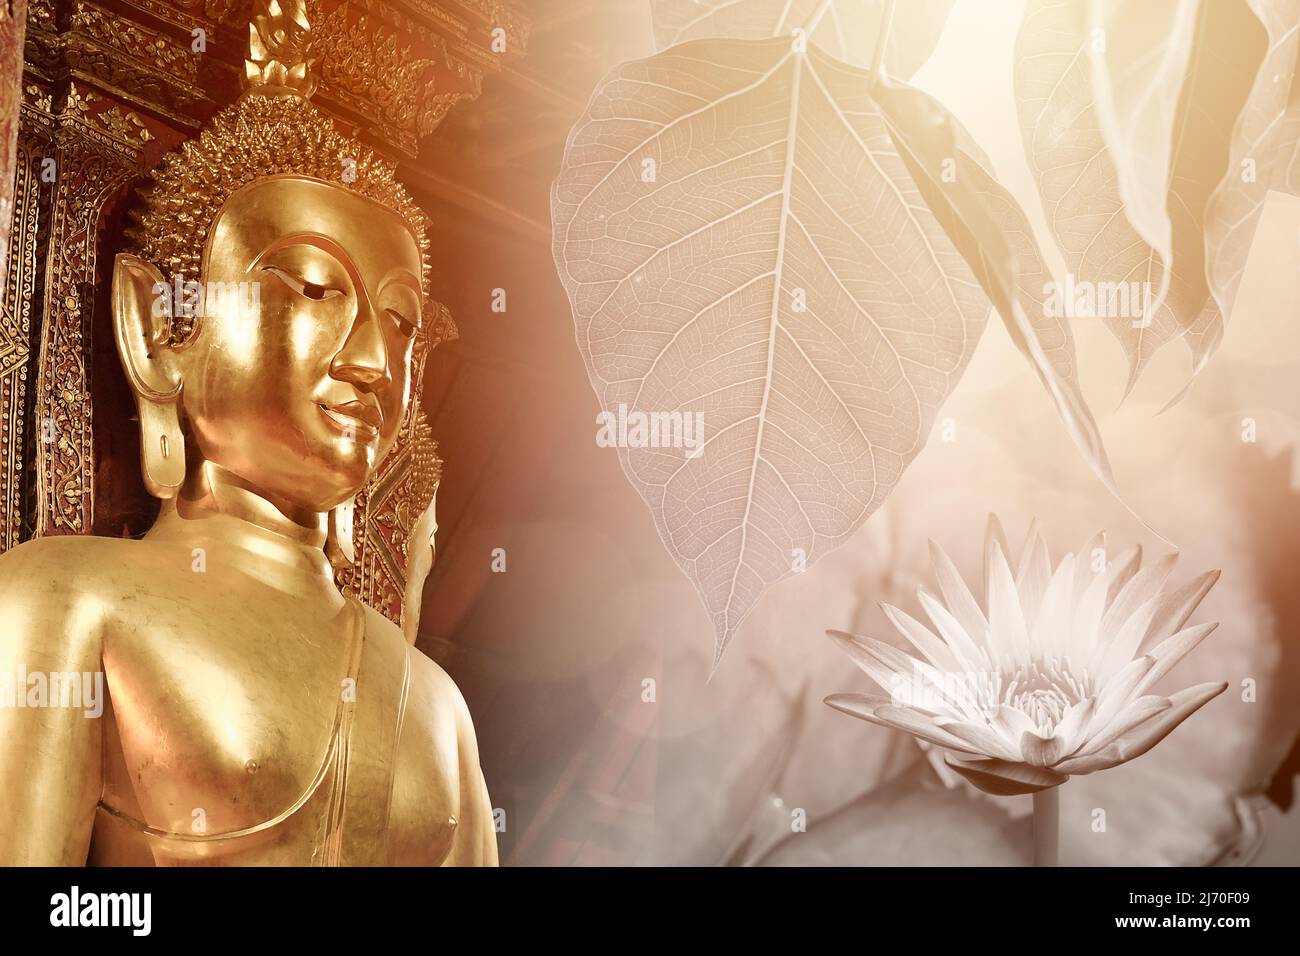 Asian Buddha in Thai temple with lotus bodhi symbol of wisdom peace and nirvana Stock Photo